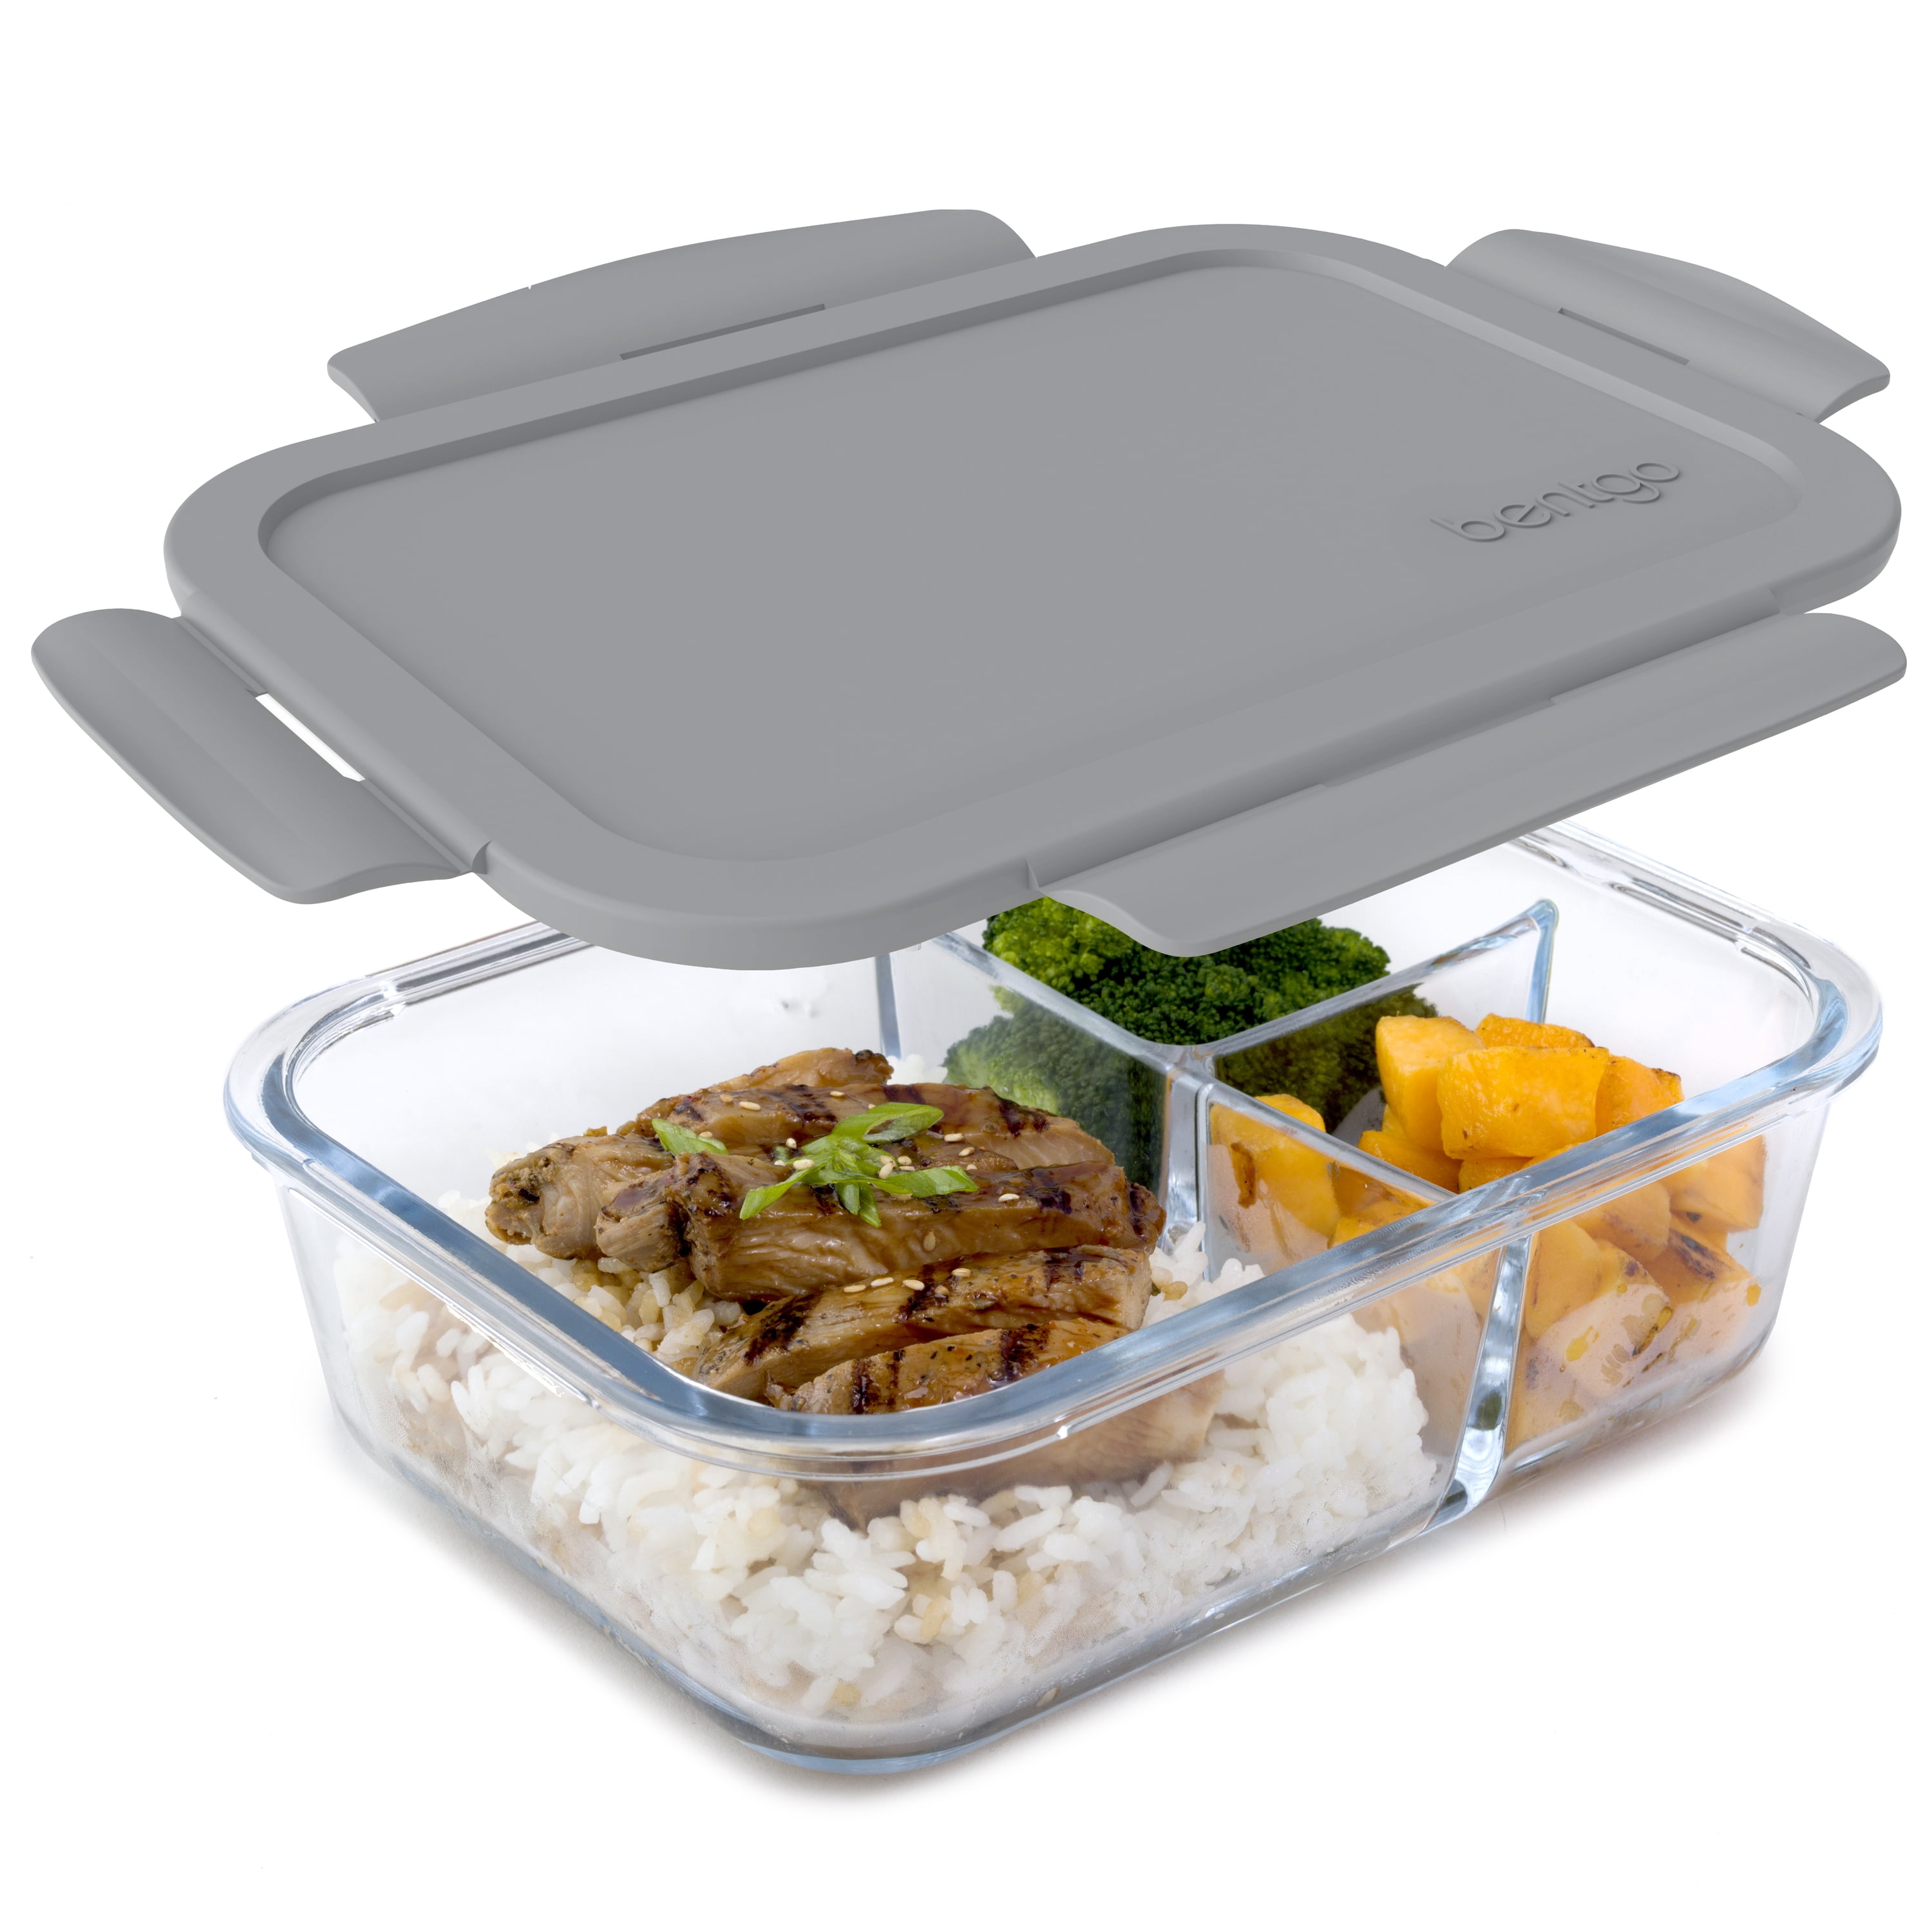 Bentgo® Stainless Insulated Food Container - Triple Layer Insulation,  Leak-Proof Lid, Wide Mouth Design - Sustainable 2.4 Cup Capacity,  Food-Grade